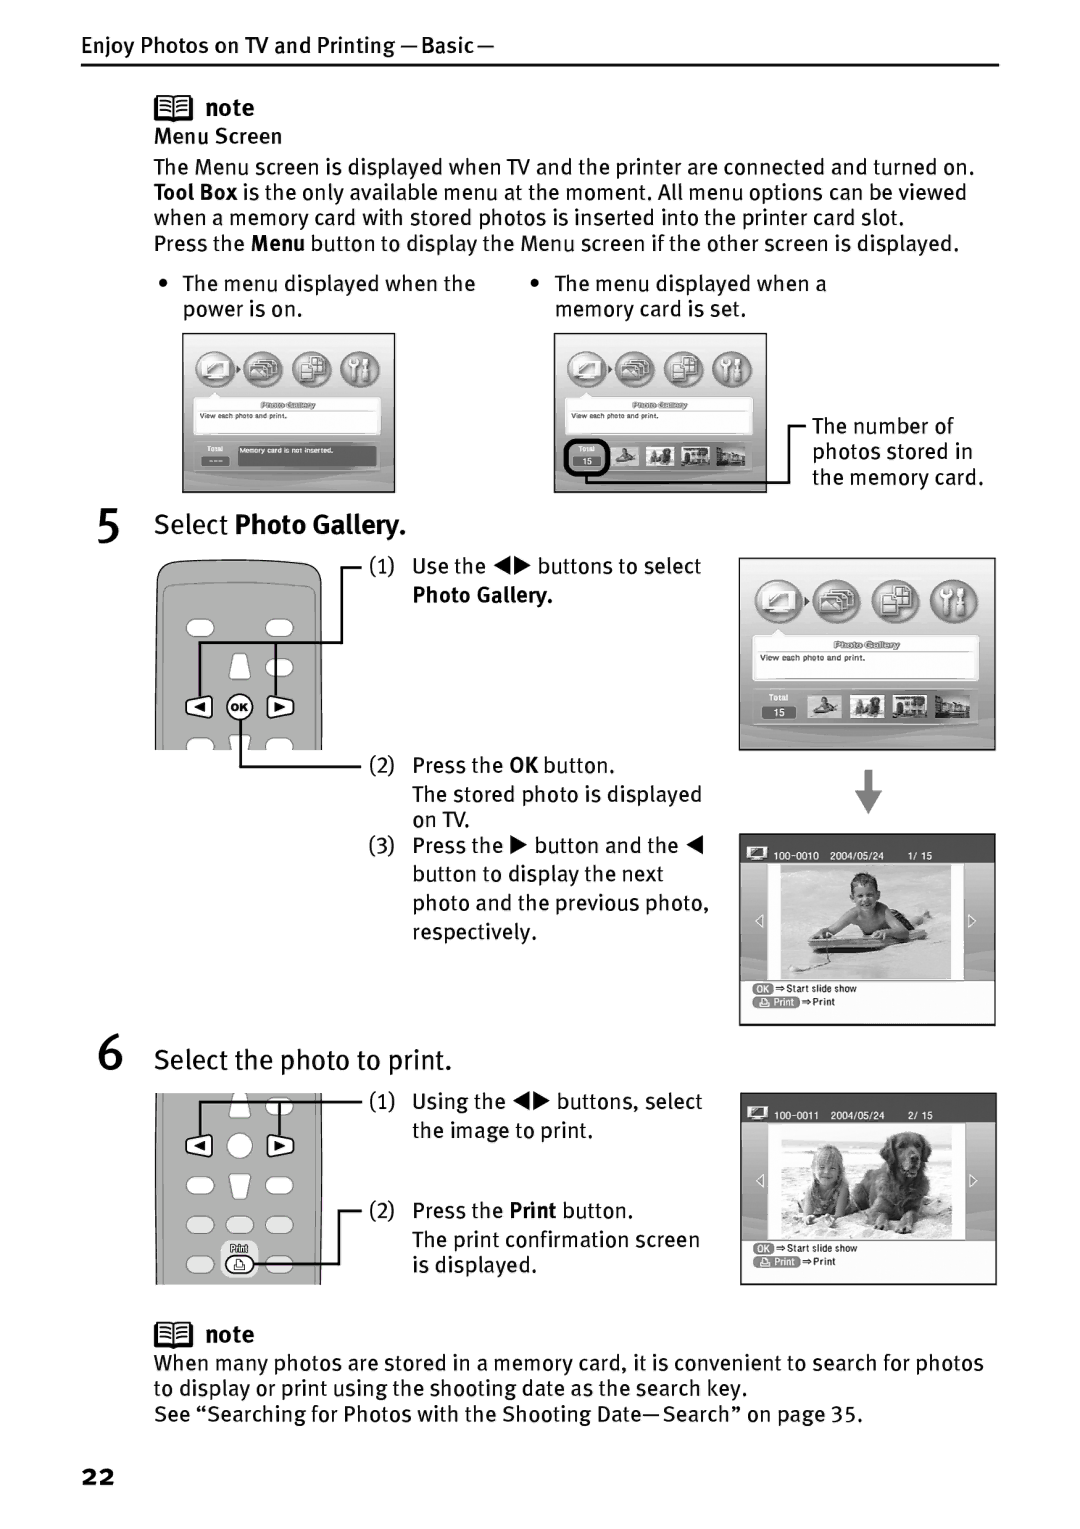 Canon DS700 manual Select Photo Gallery, Select the photo to print, Enjoy Photos on TV and Printing -Basic Menu Screen 